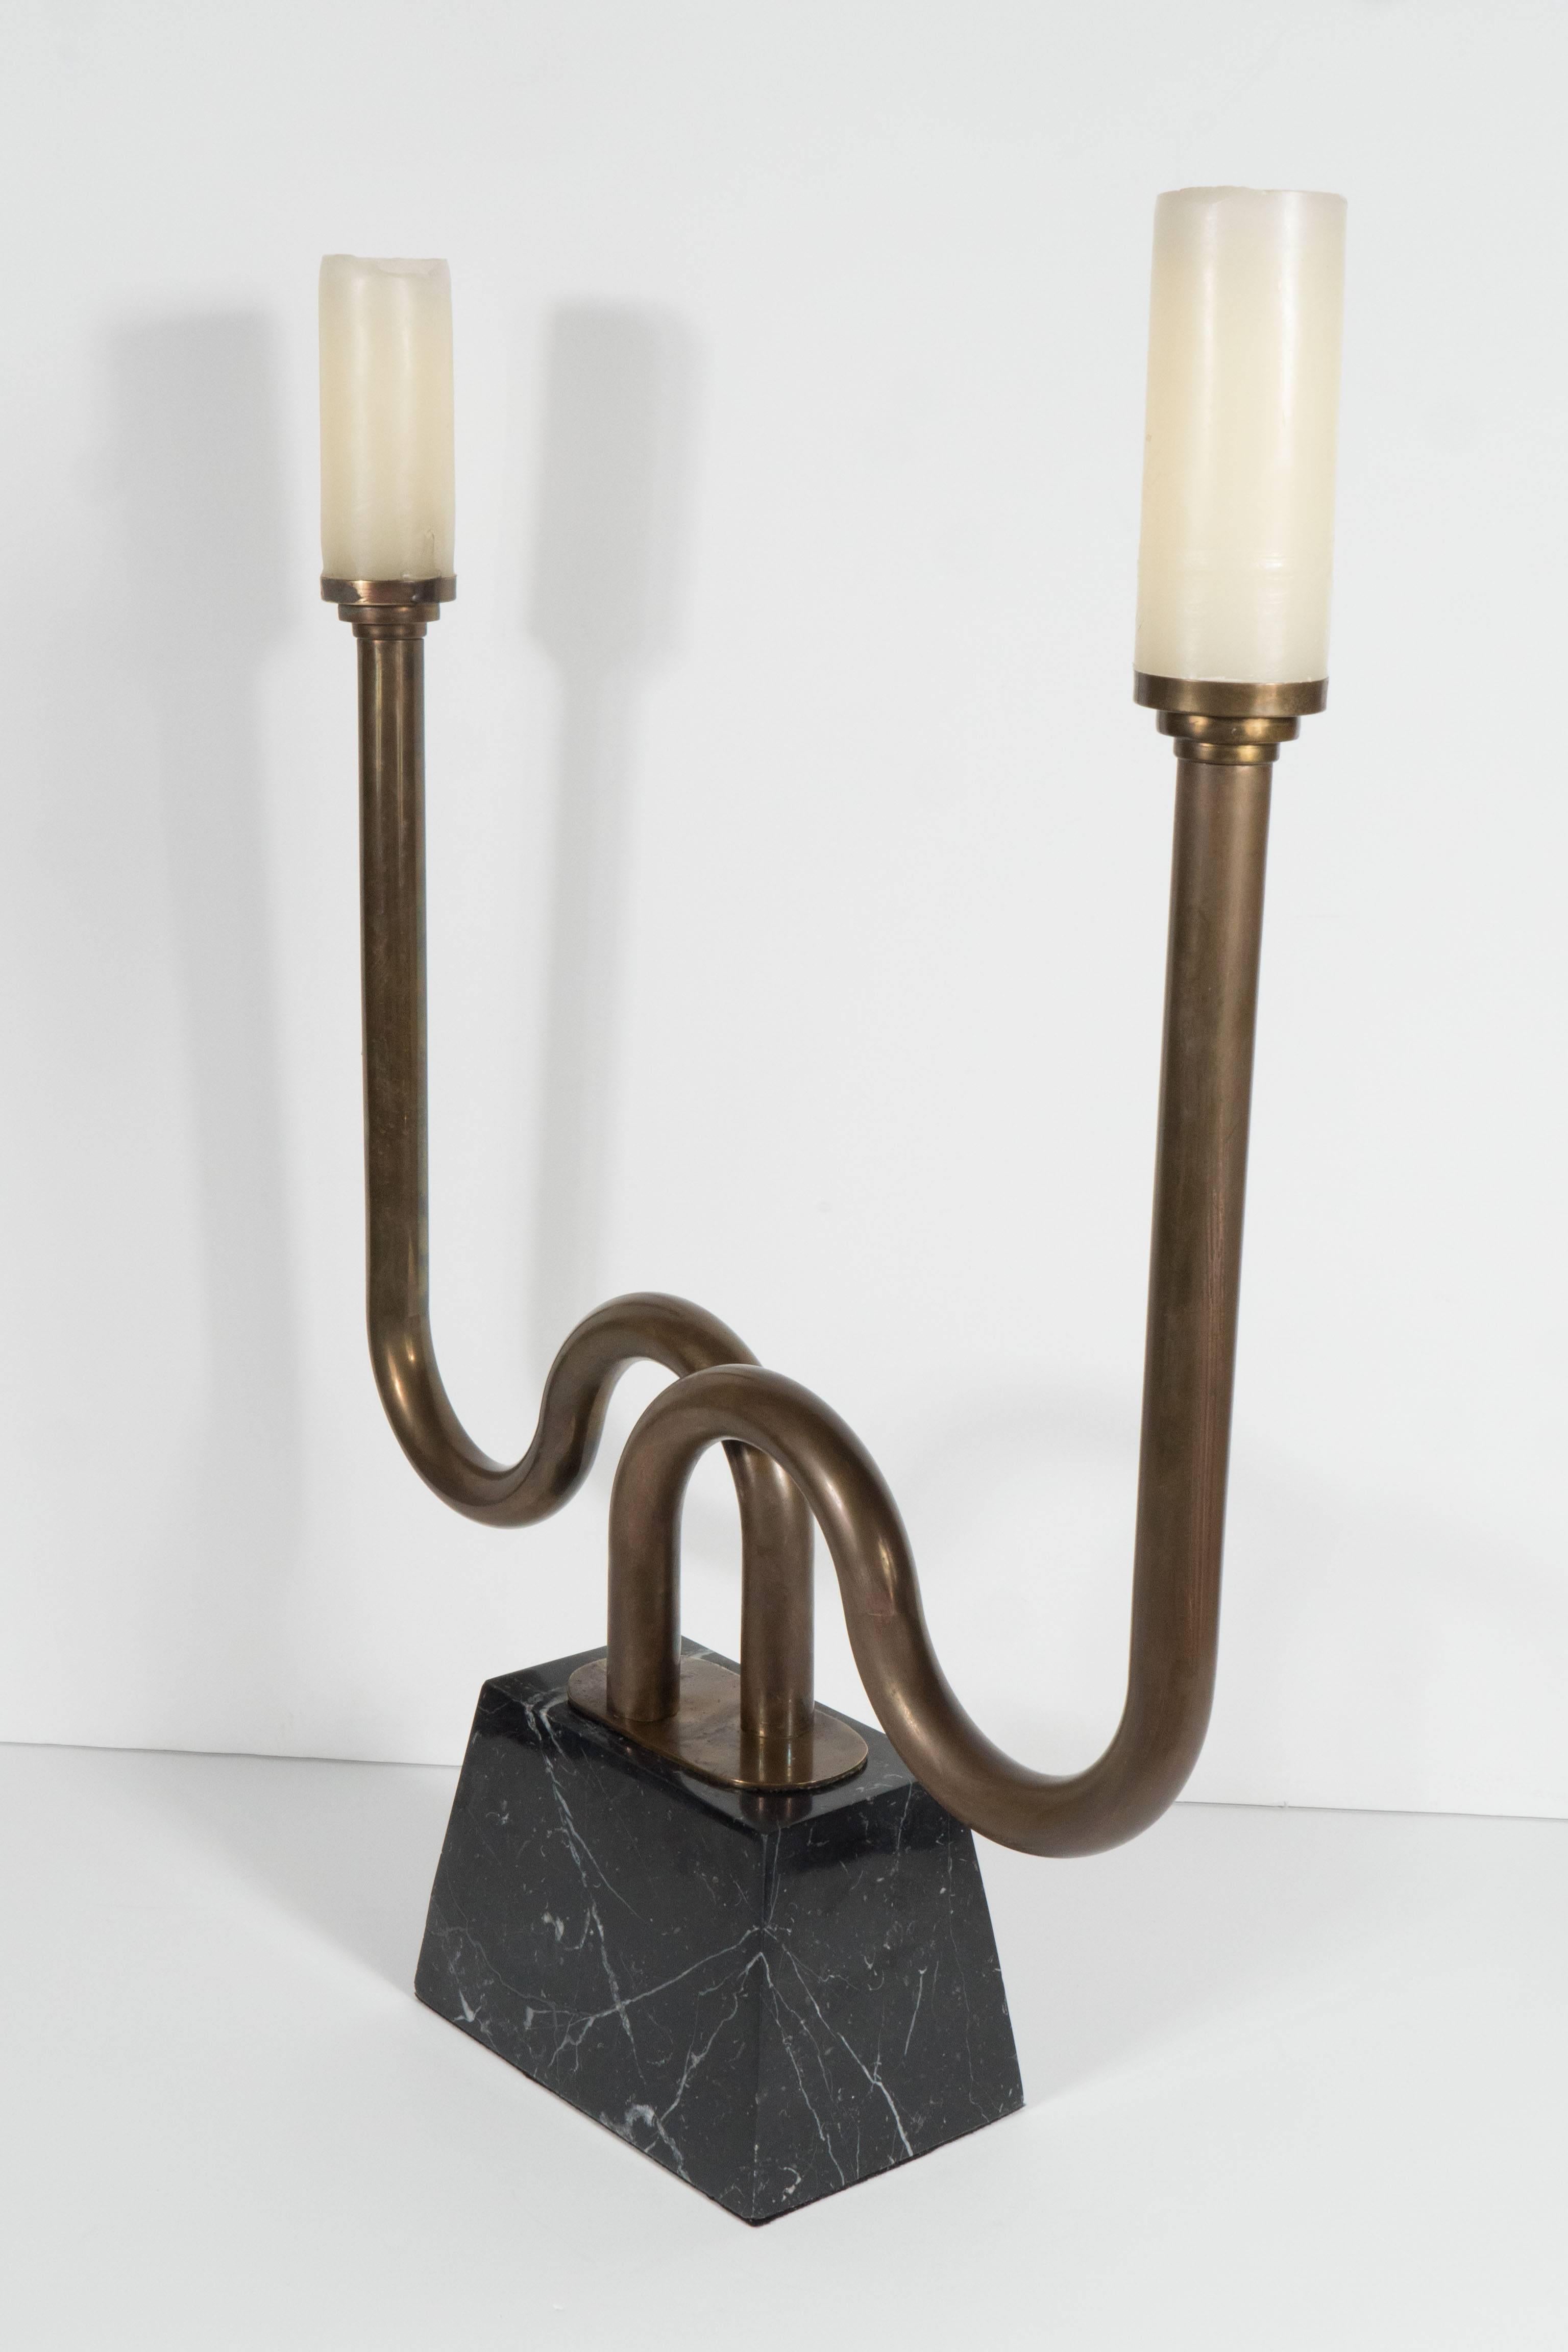 A sculptural pair of Mid-Century bronze candlesticks on polished black marble bases. Criss-crossing tubes of bronze each support cylindrical candles up to 2